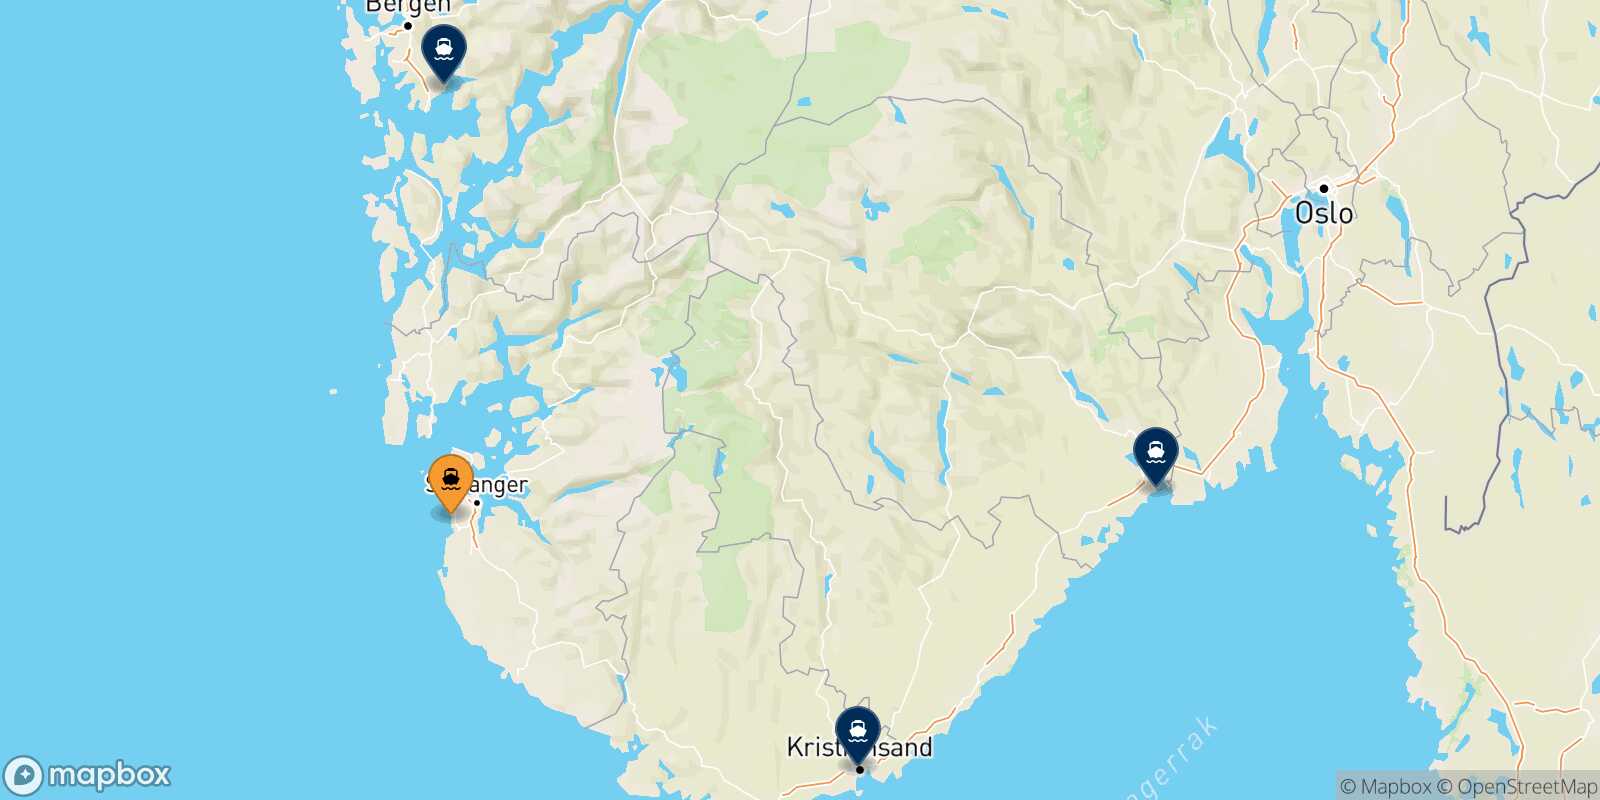 Map of the destinations reachable from Stavanger